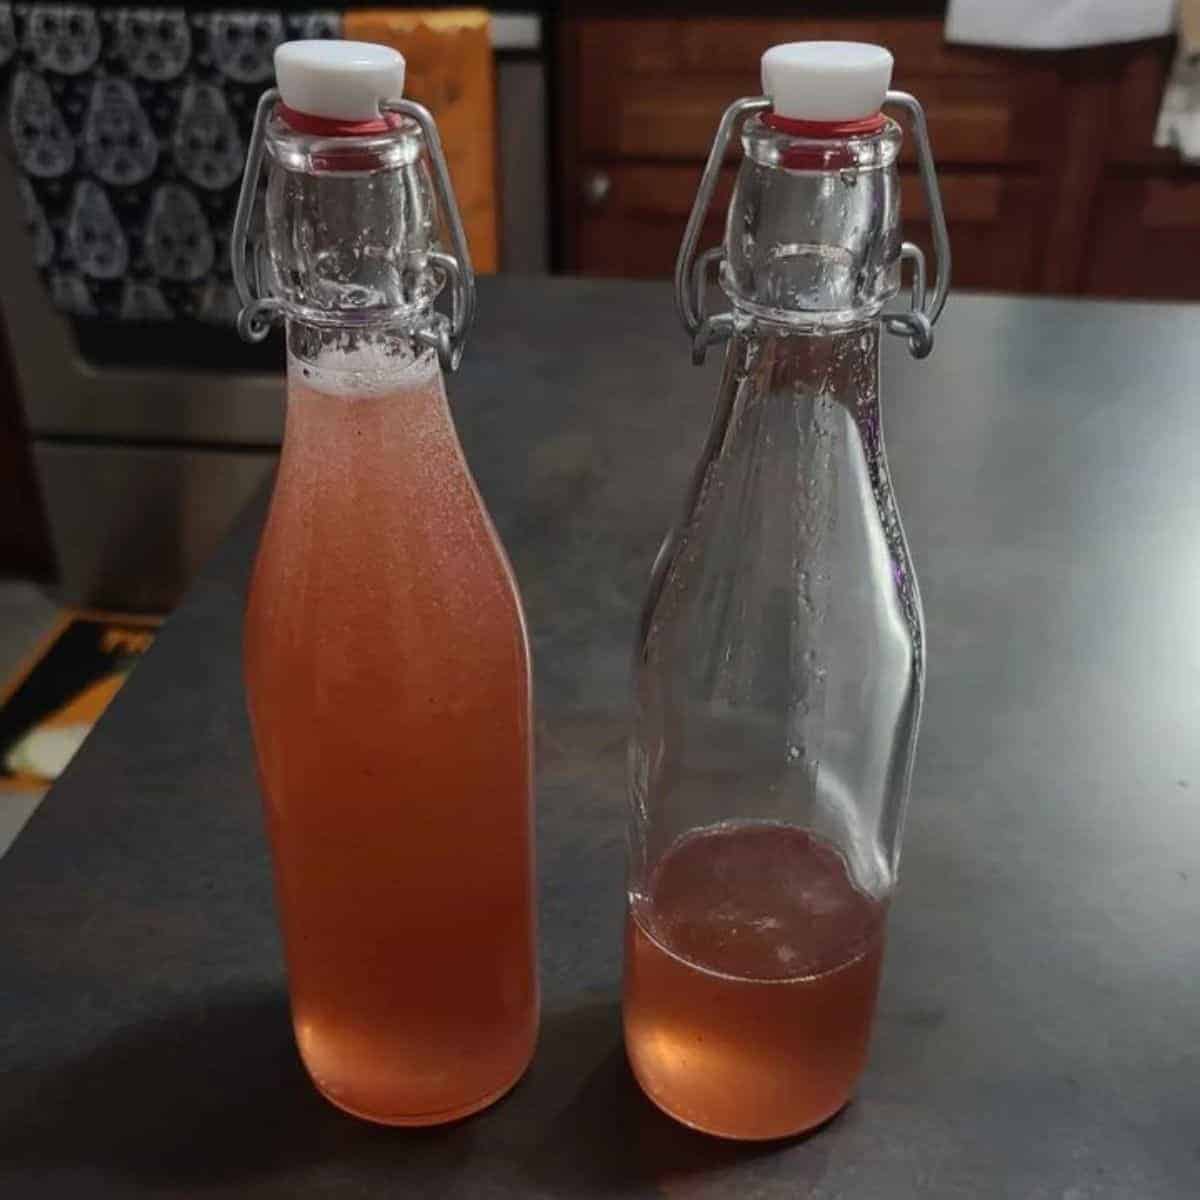  Two bottles filled with a liquid in dark pink colour